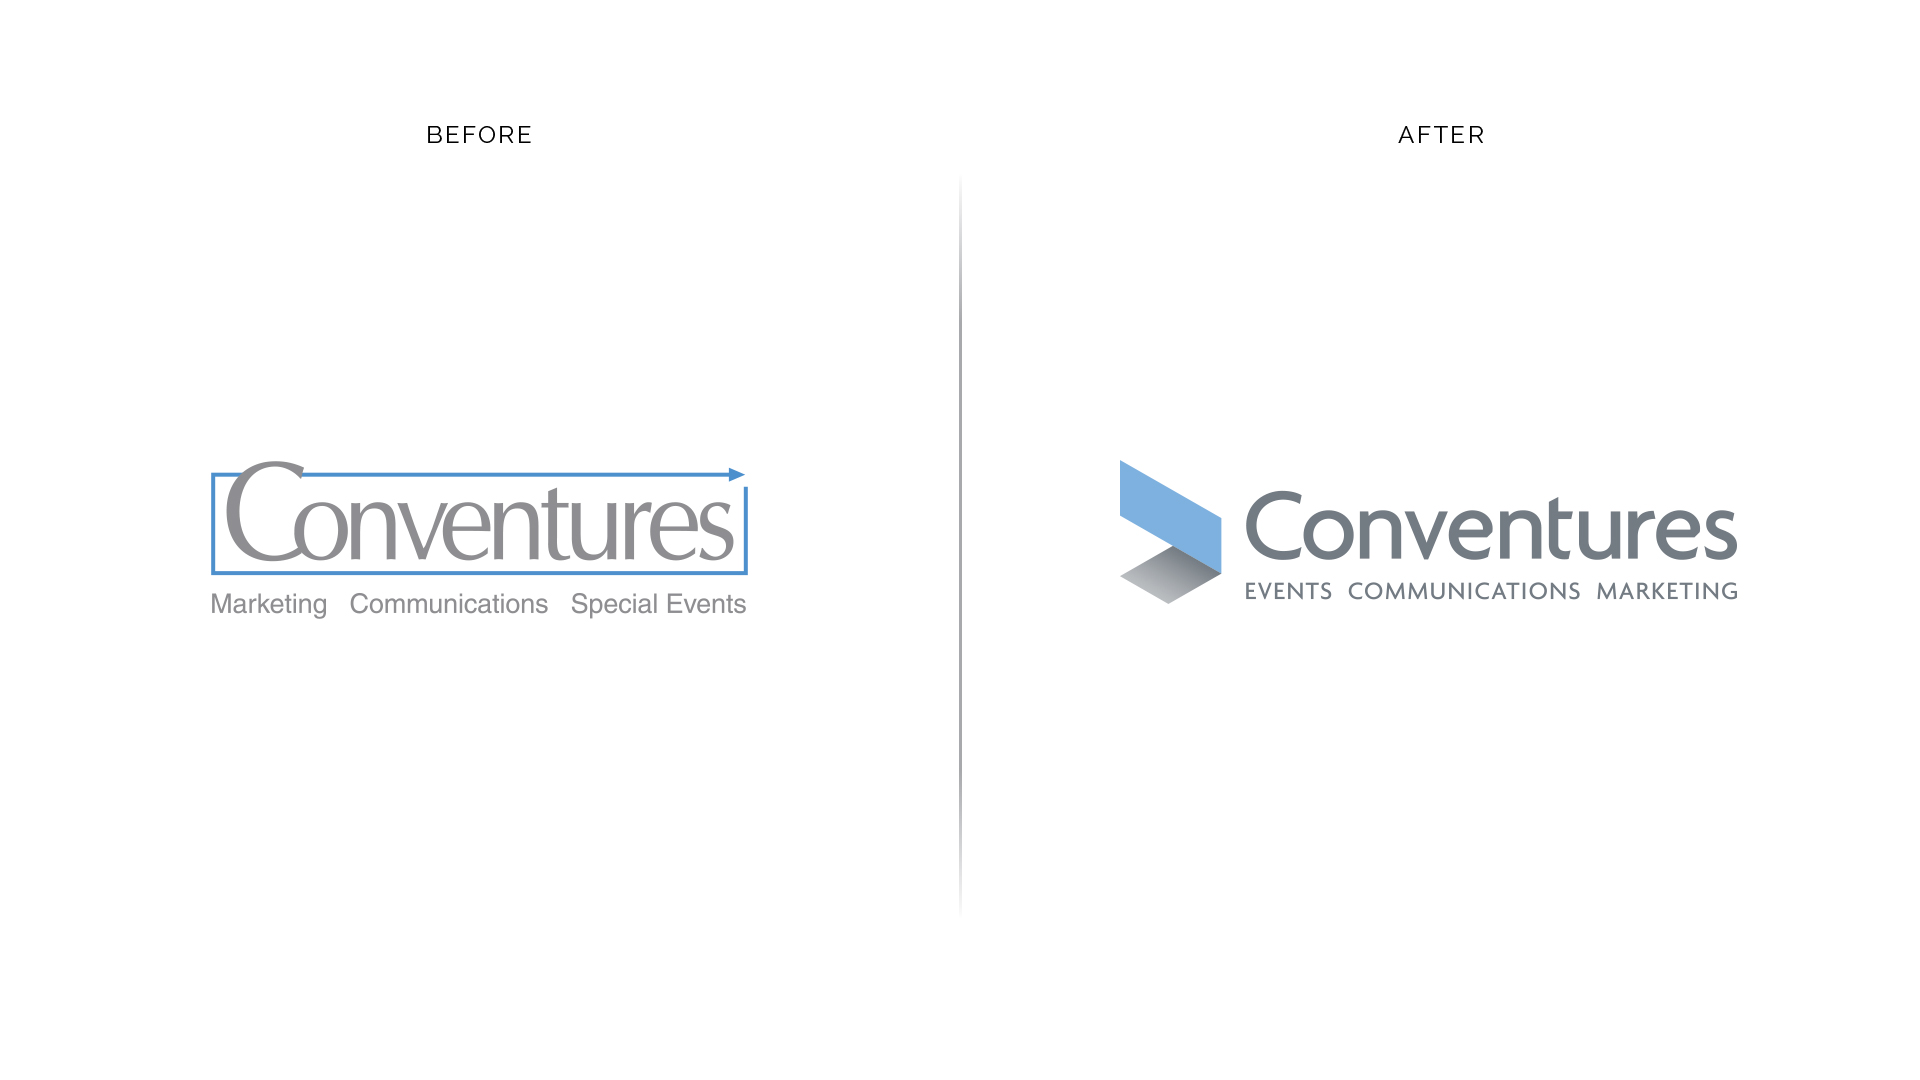 Before-After_logos-6-1.jpg